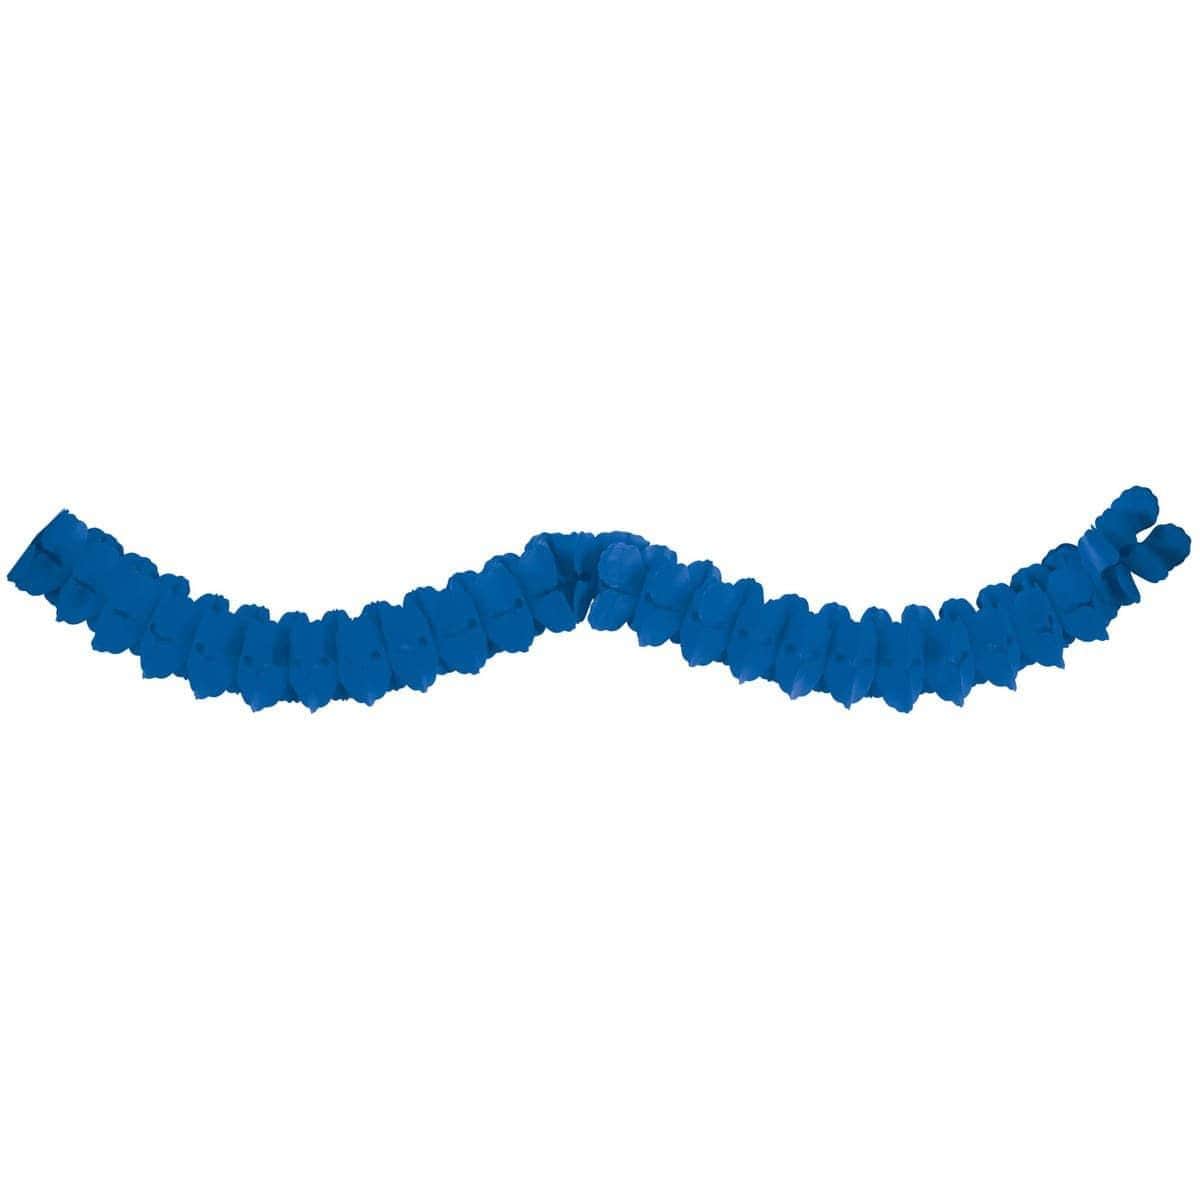 Buy Decorations Paper Garlands - Bright Royal Blue 12 Ft sold at Party Expert